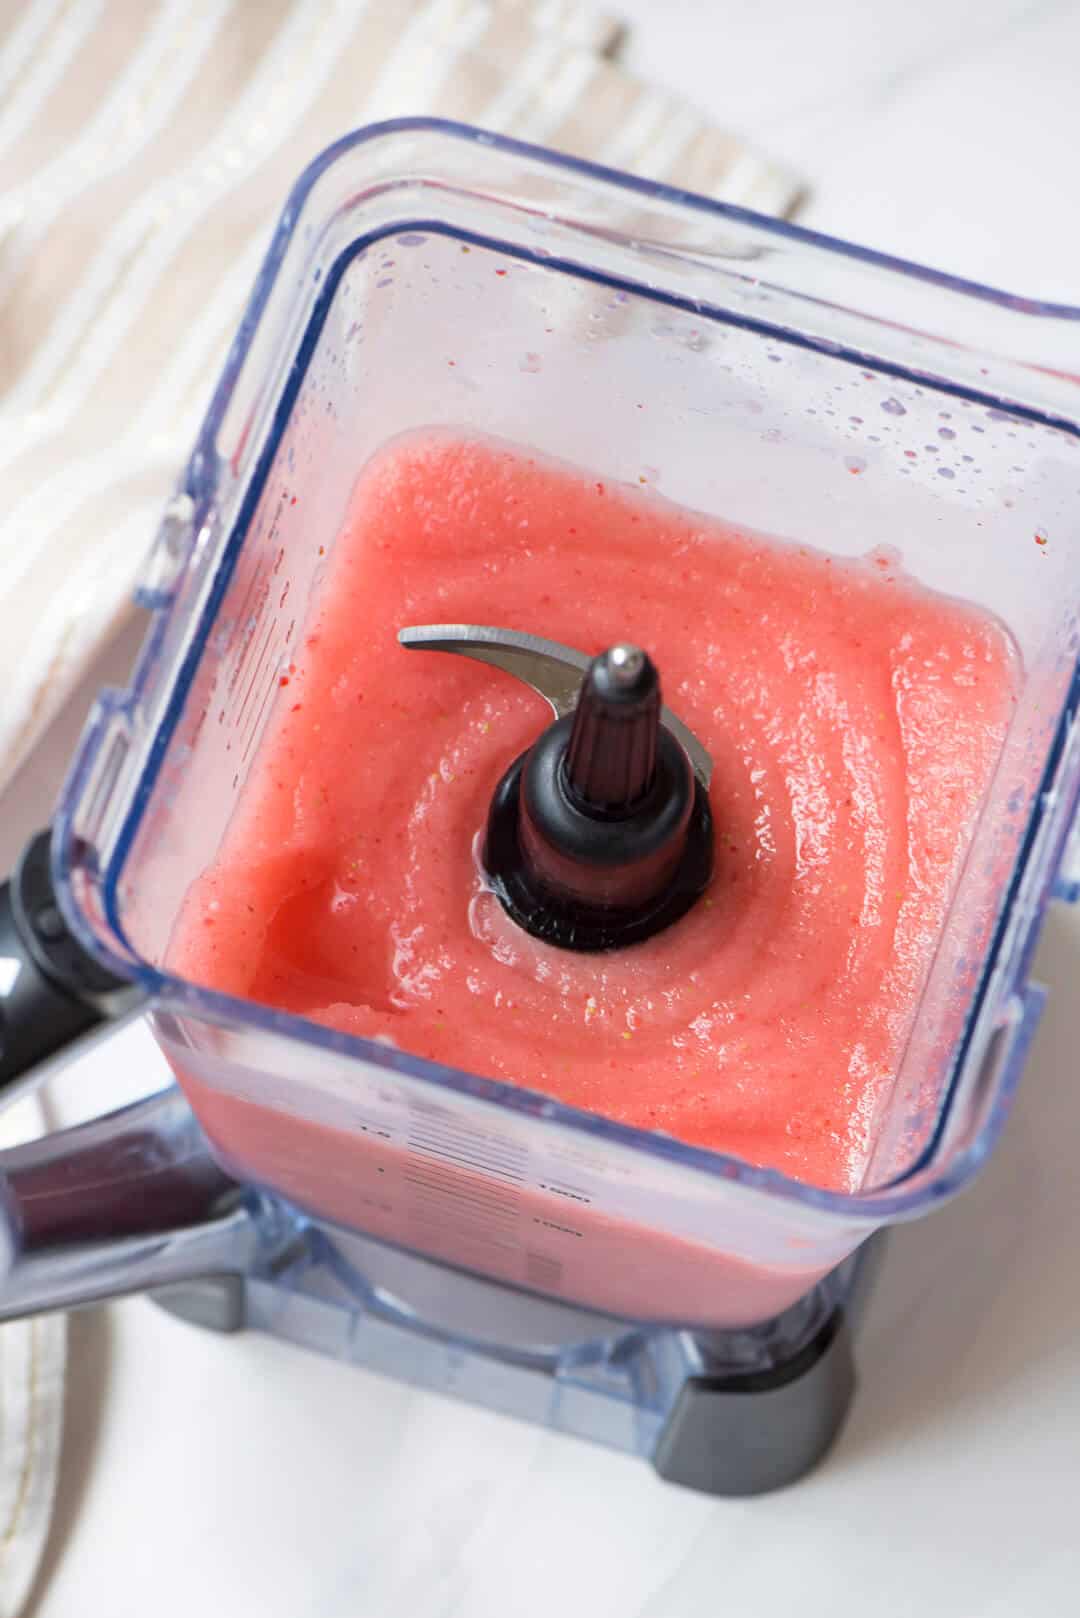 An over the top image showing the inside of the blender after the ingredients have been processed.